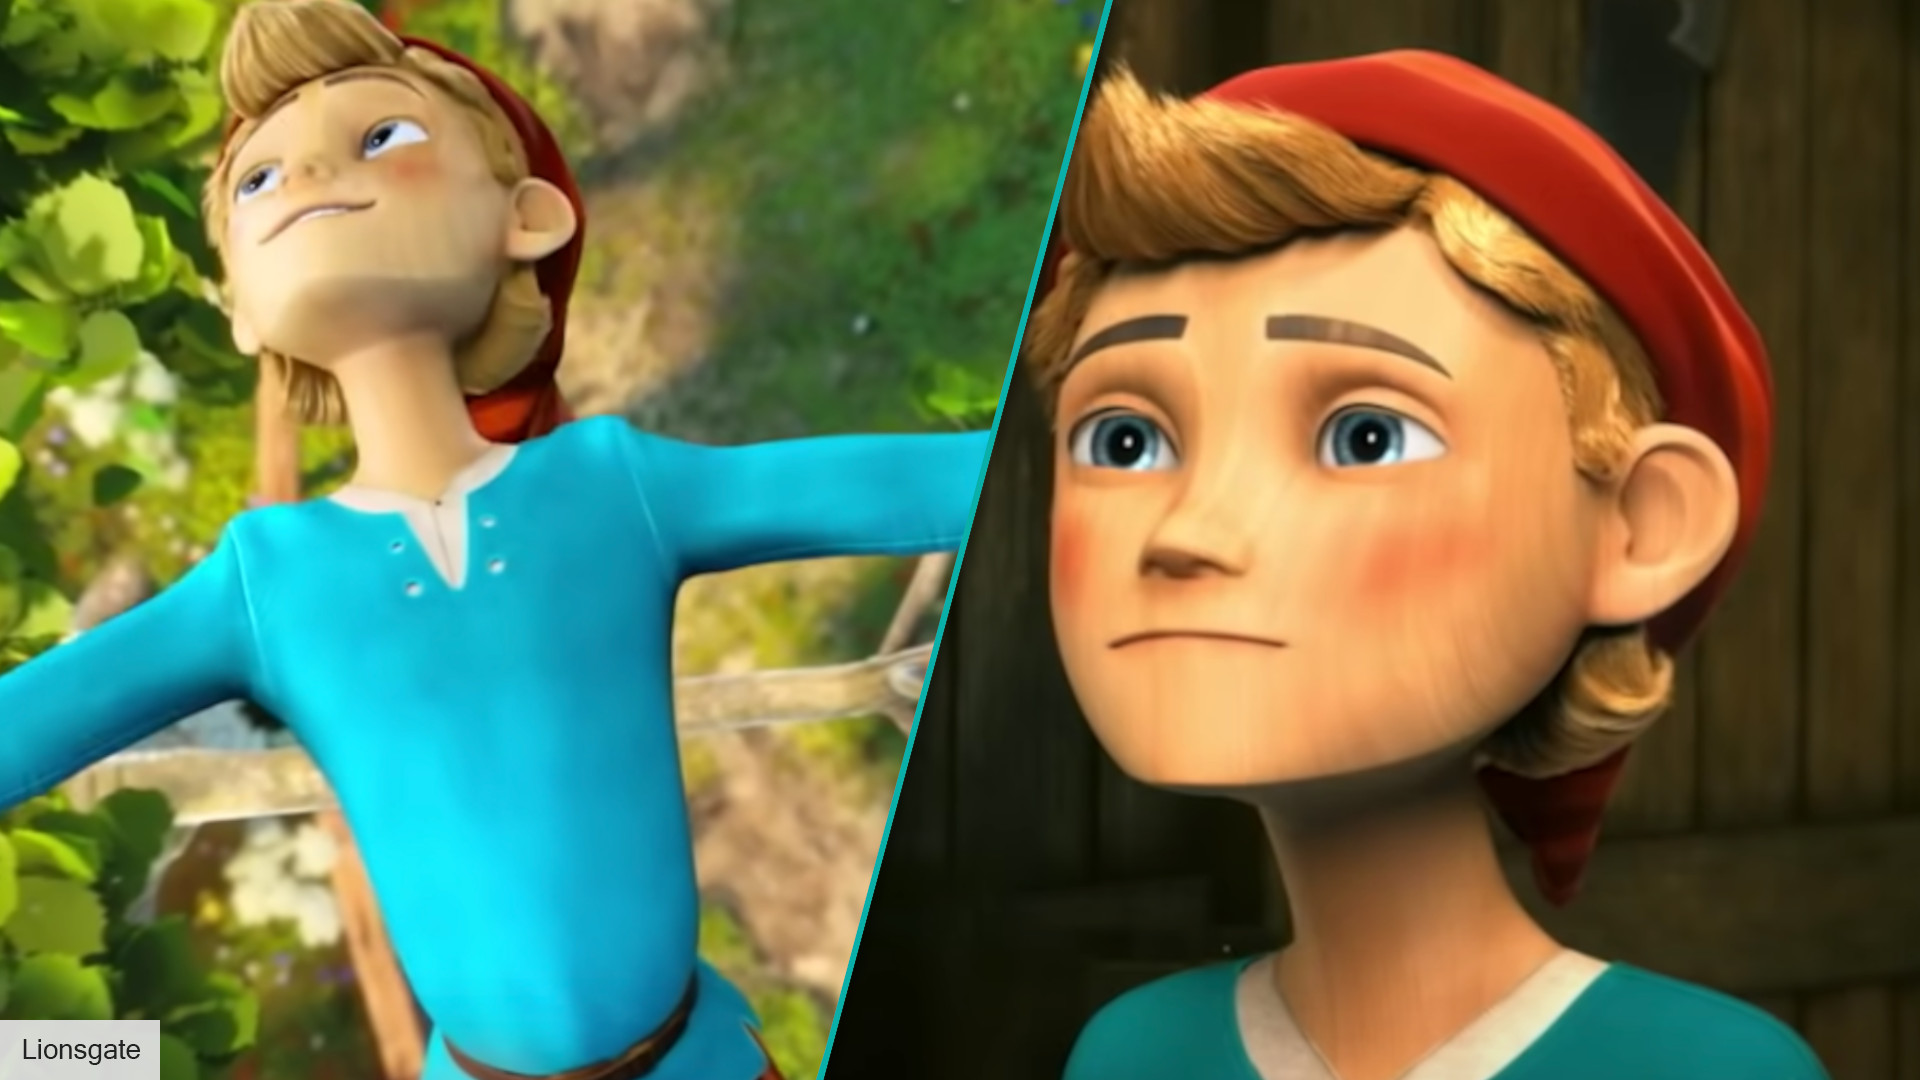 Lionsgate's Pinocchio movie gets one of the worst trailers we've ever seen  | The Digital Fix